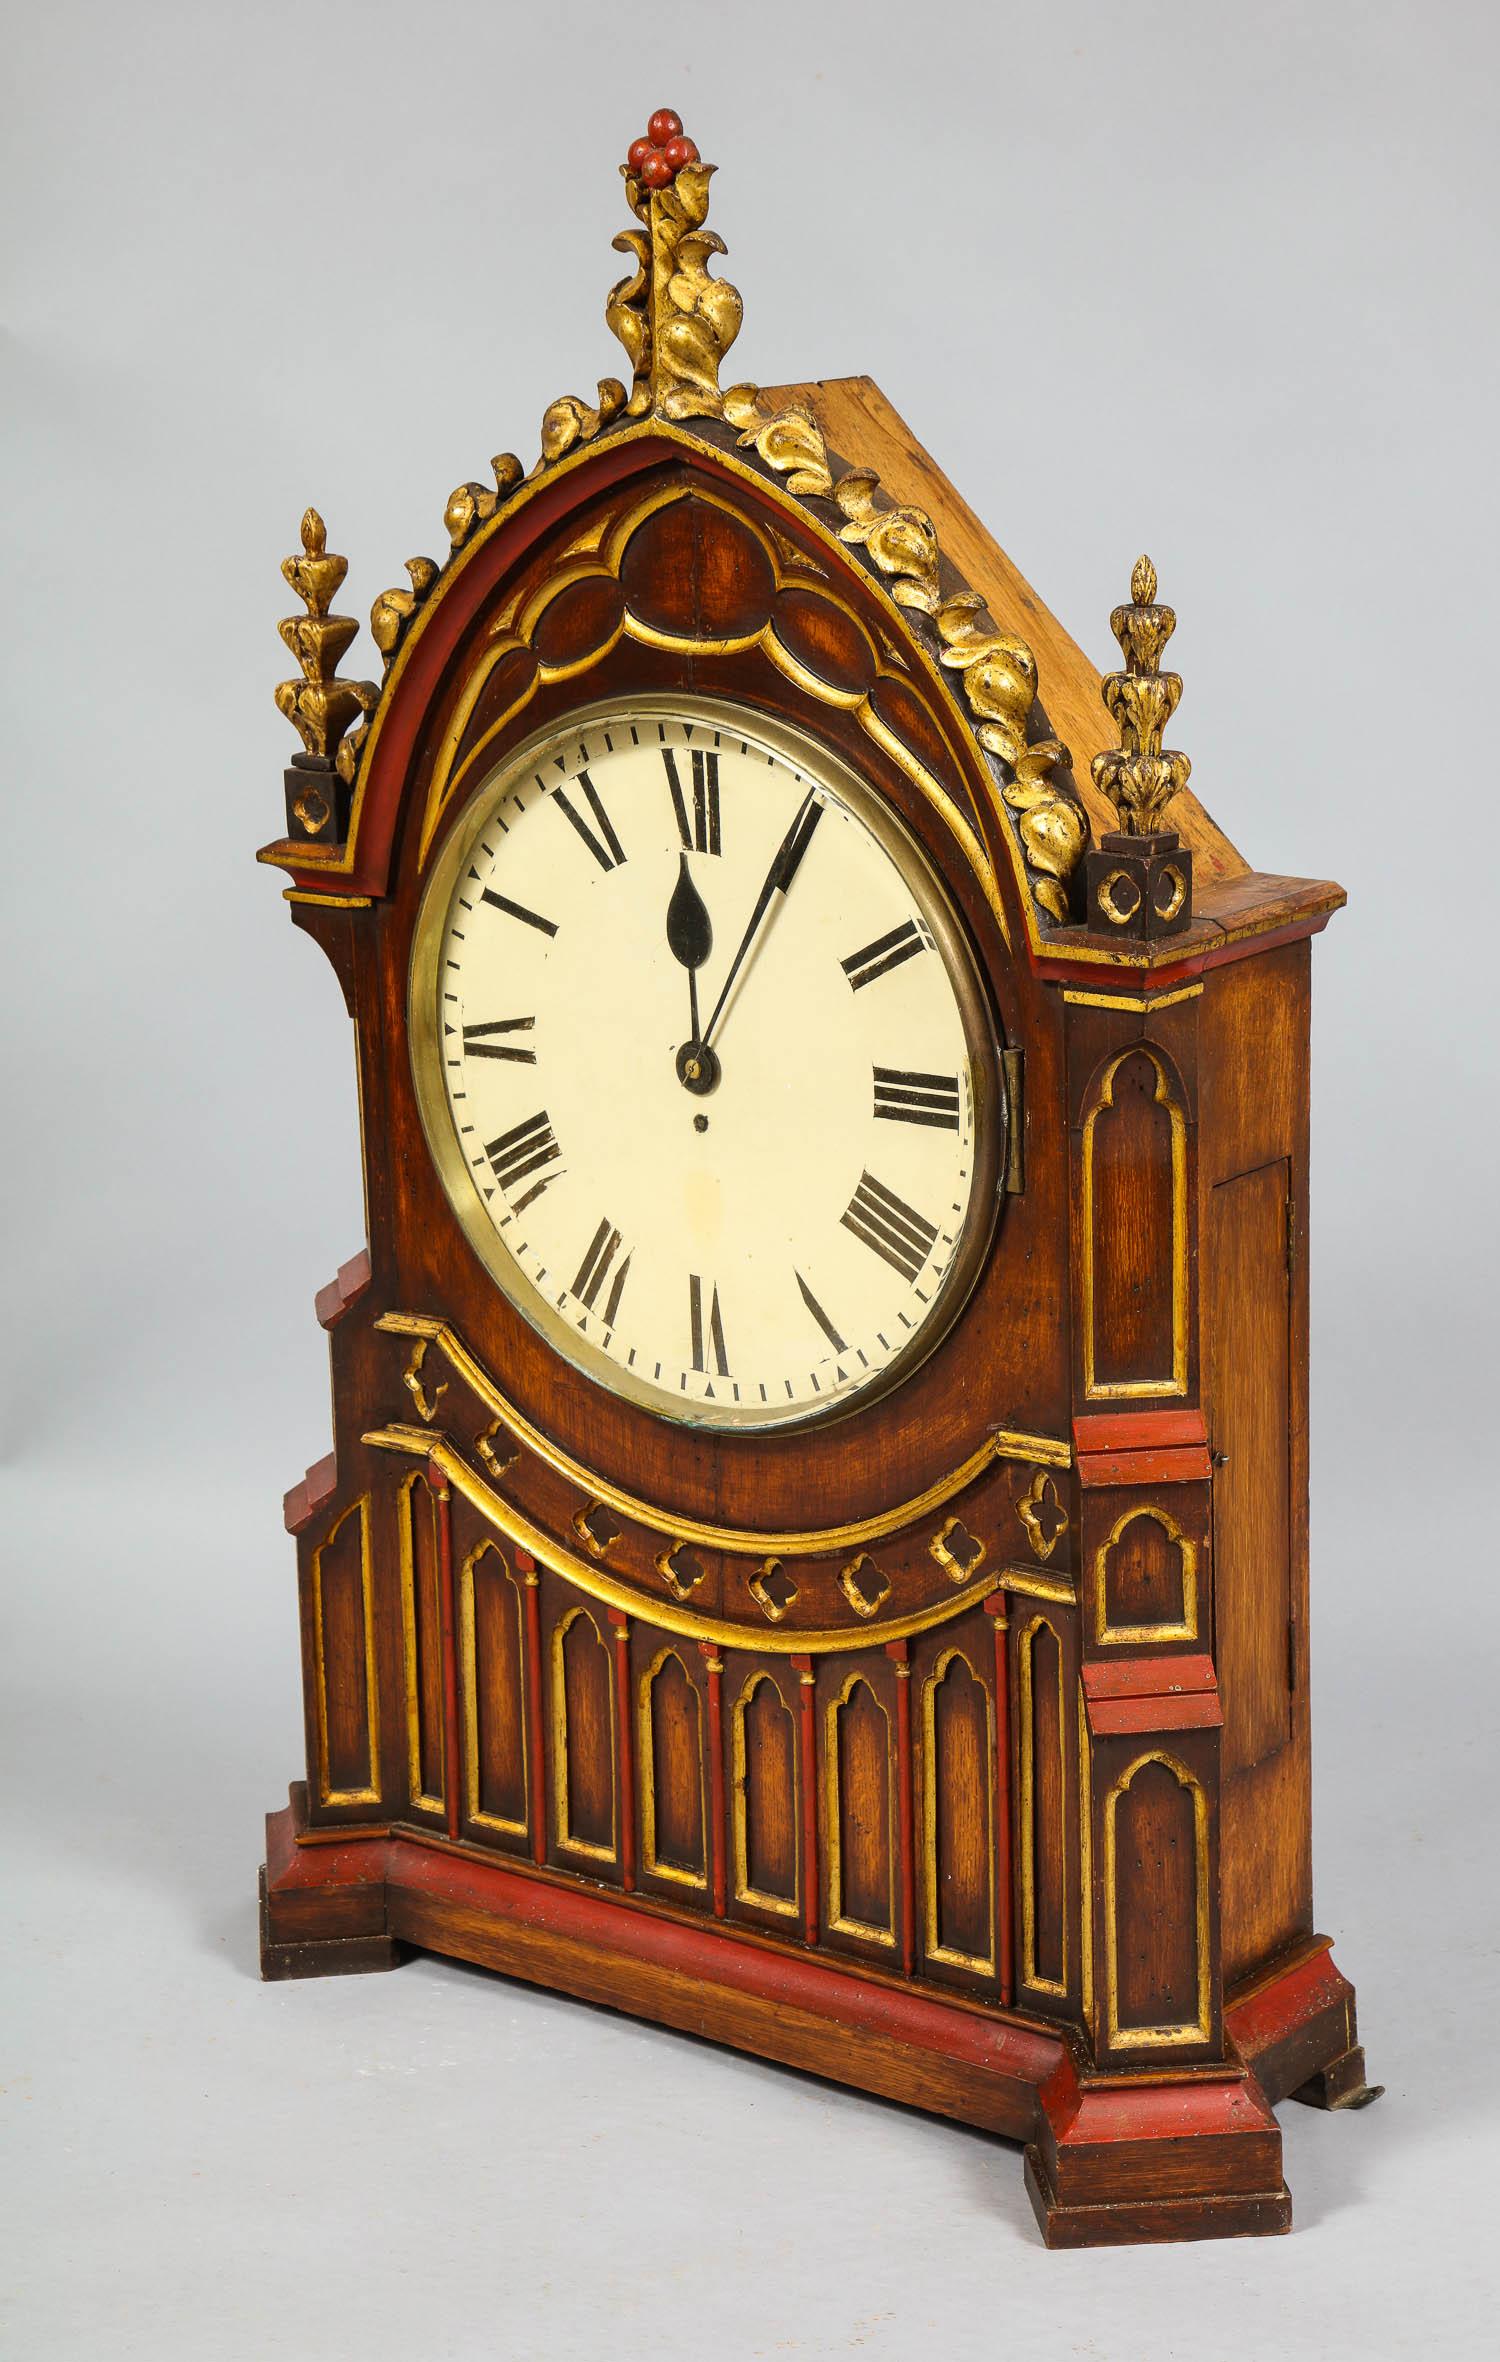 Very fine English early to mid-19th century Gothic clock of important scale having carved and gilt pediment and polychrome decorated case with trefoil tracery decoration, the movement a very fine 8 day timepiece with a fusee movement, unsigned.
The